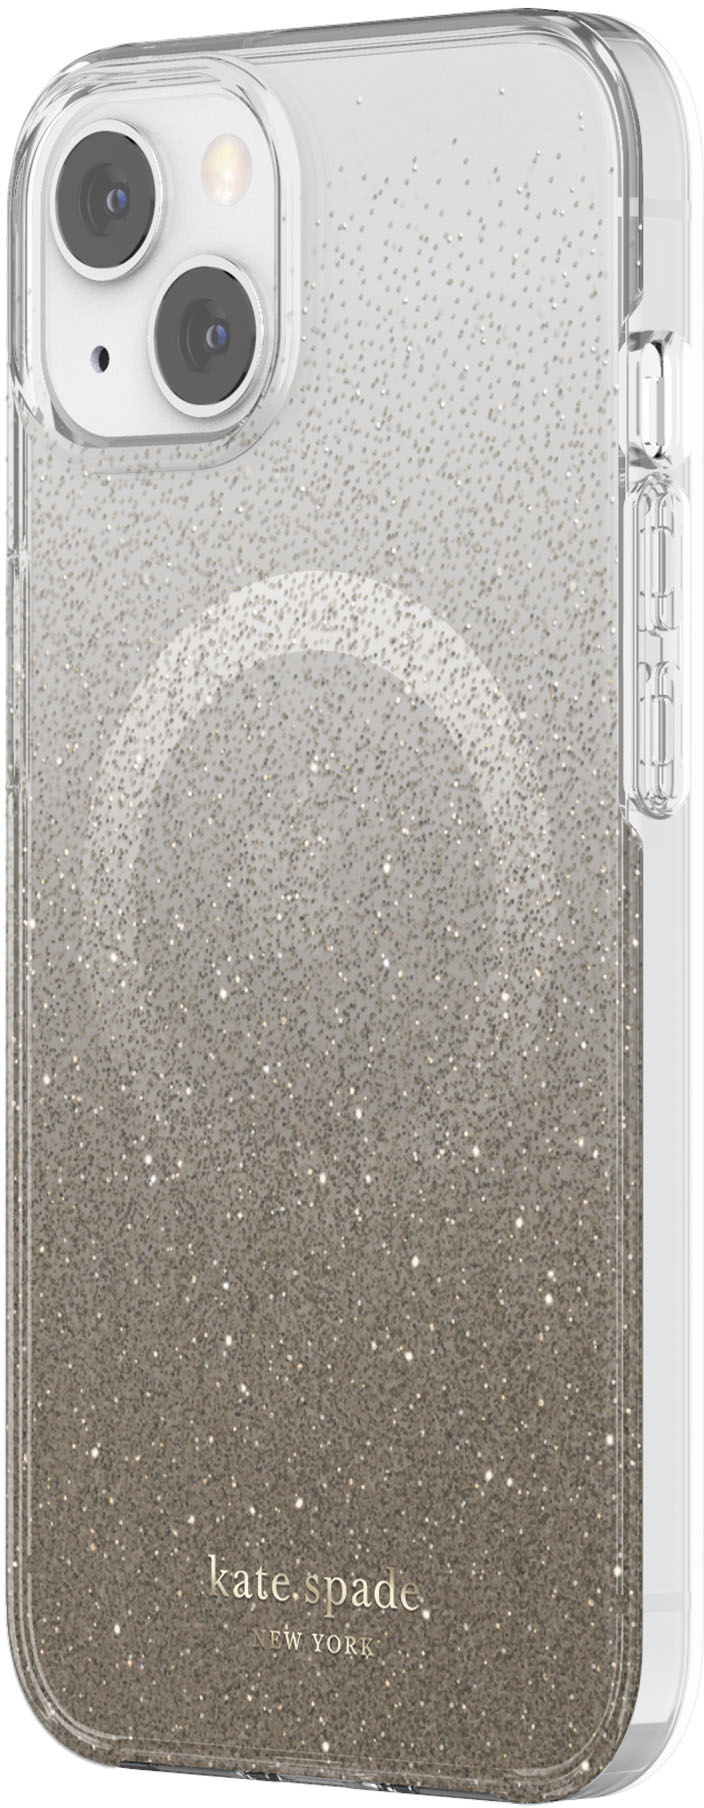 Angle View: kate spade new york - Protective Hardshell MagSafe Case for iPhone 13 - Champagne